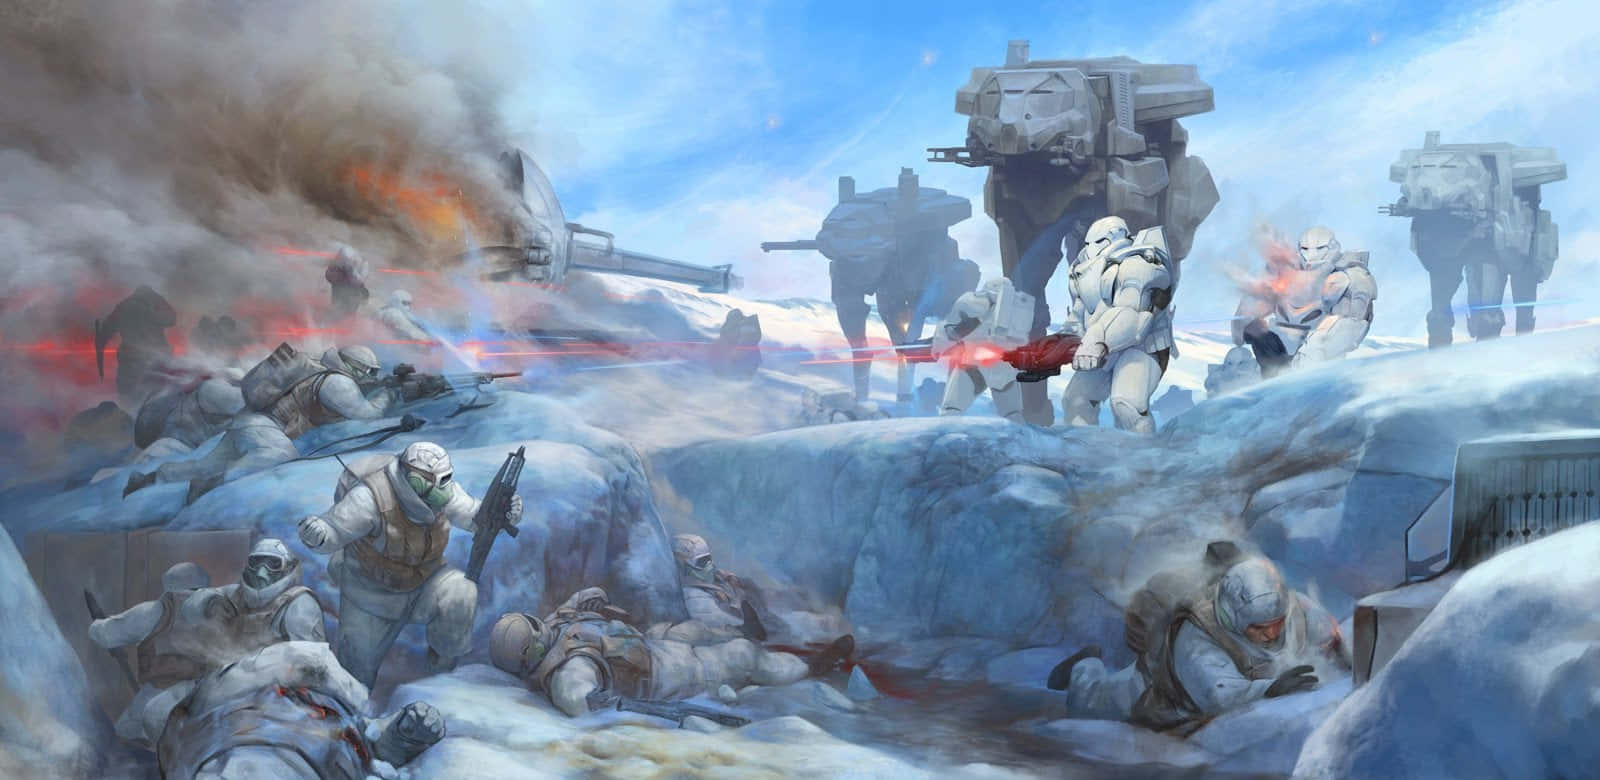 Icy Landscape of Planet Hoth Wallpaper